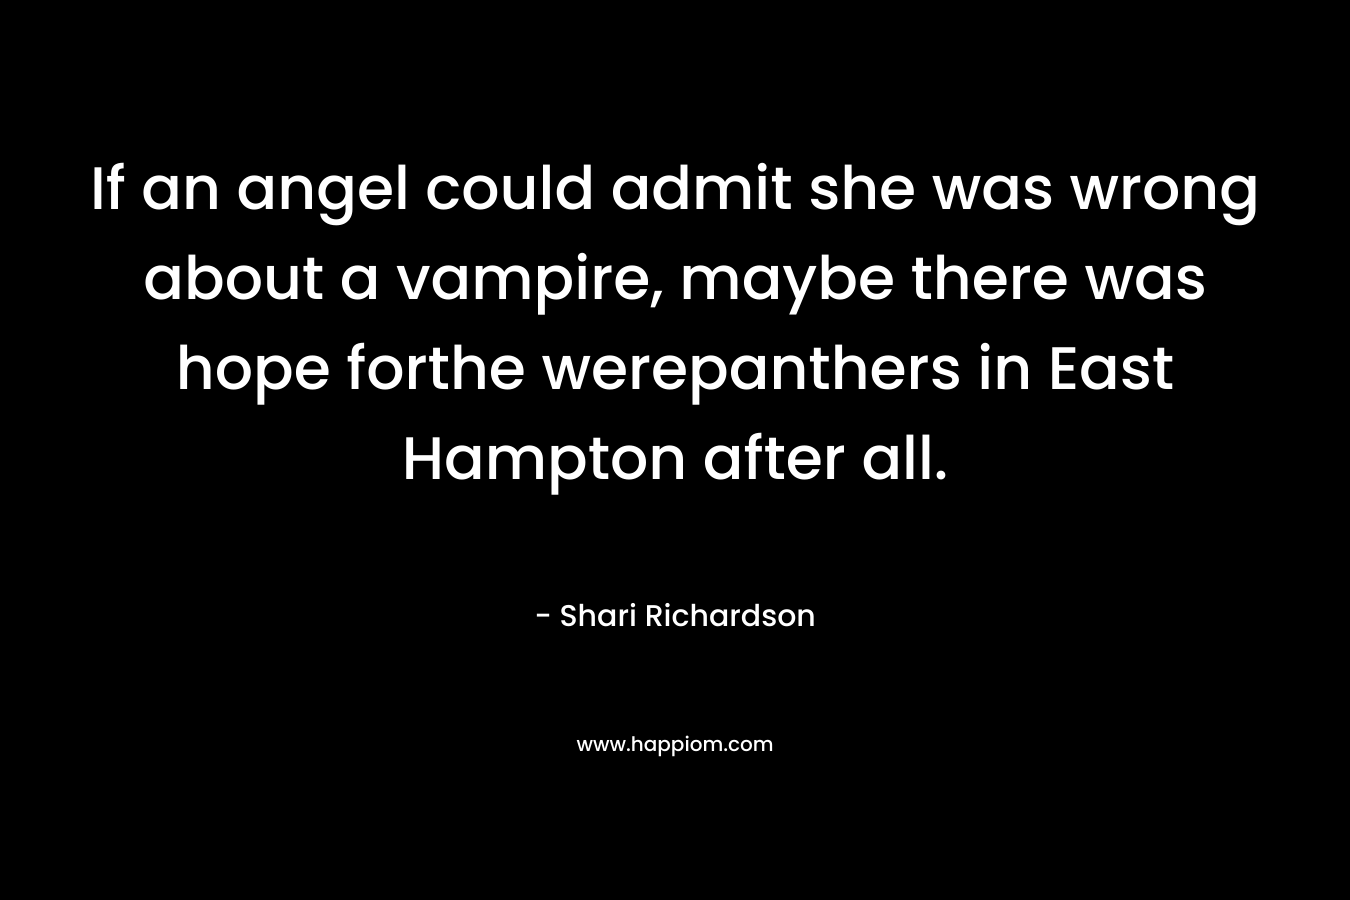 If an angel could admit she was wrong about a vampire, maybe there was hope forthe werepanthers in East Hampton after all.